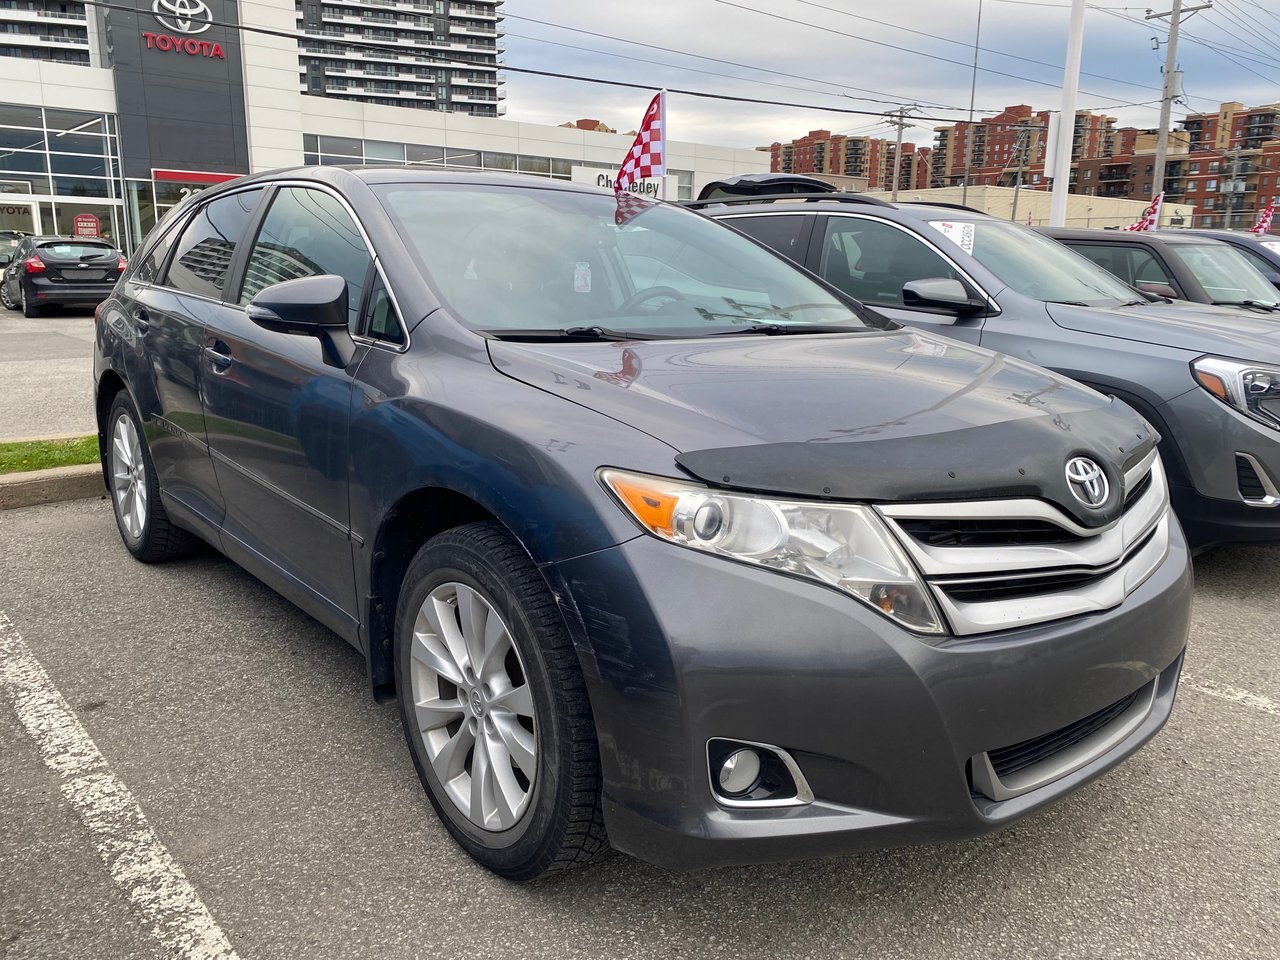 2014 Toyota Venza XLE AWD Toit Pano Cuir Bluetooth Camera Sieges Cha